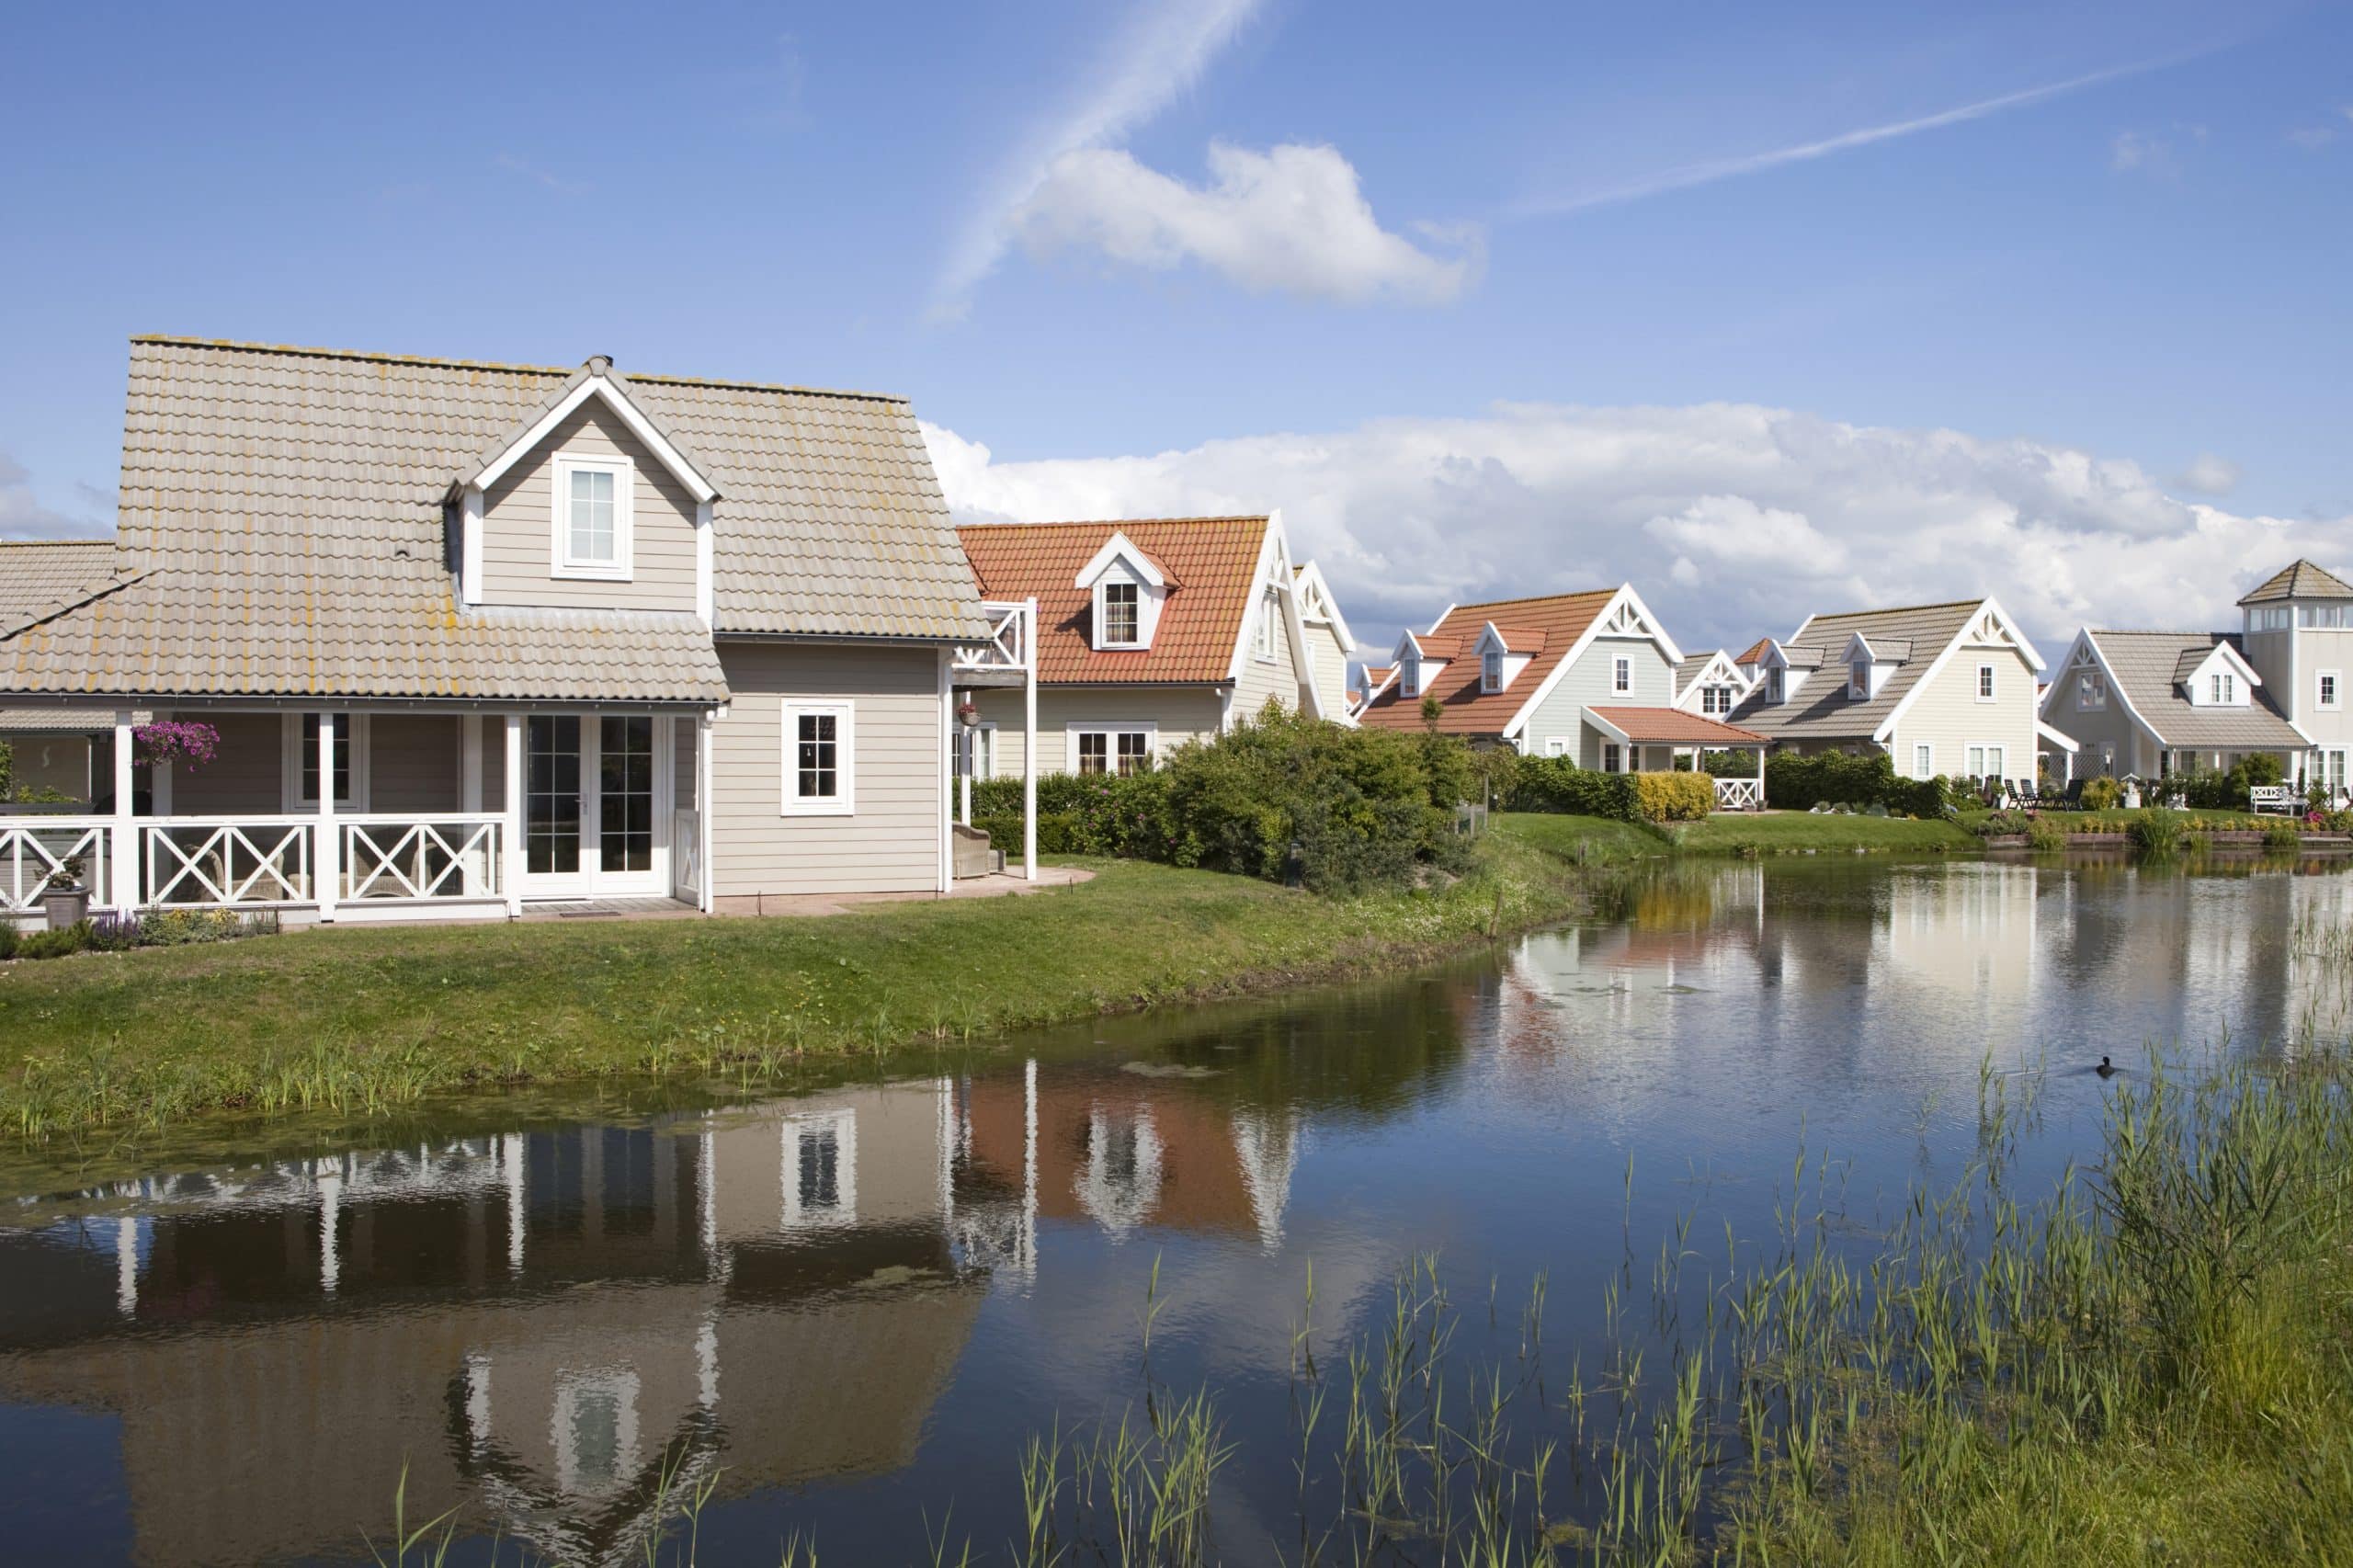 "reflection of some Scandinavian style holiday houses in the water on a clear day; 's-Gravenzande, Netherlands"